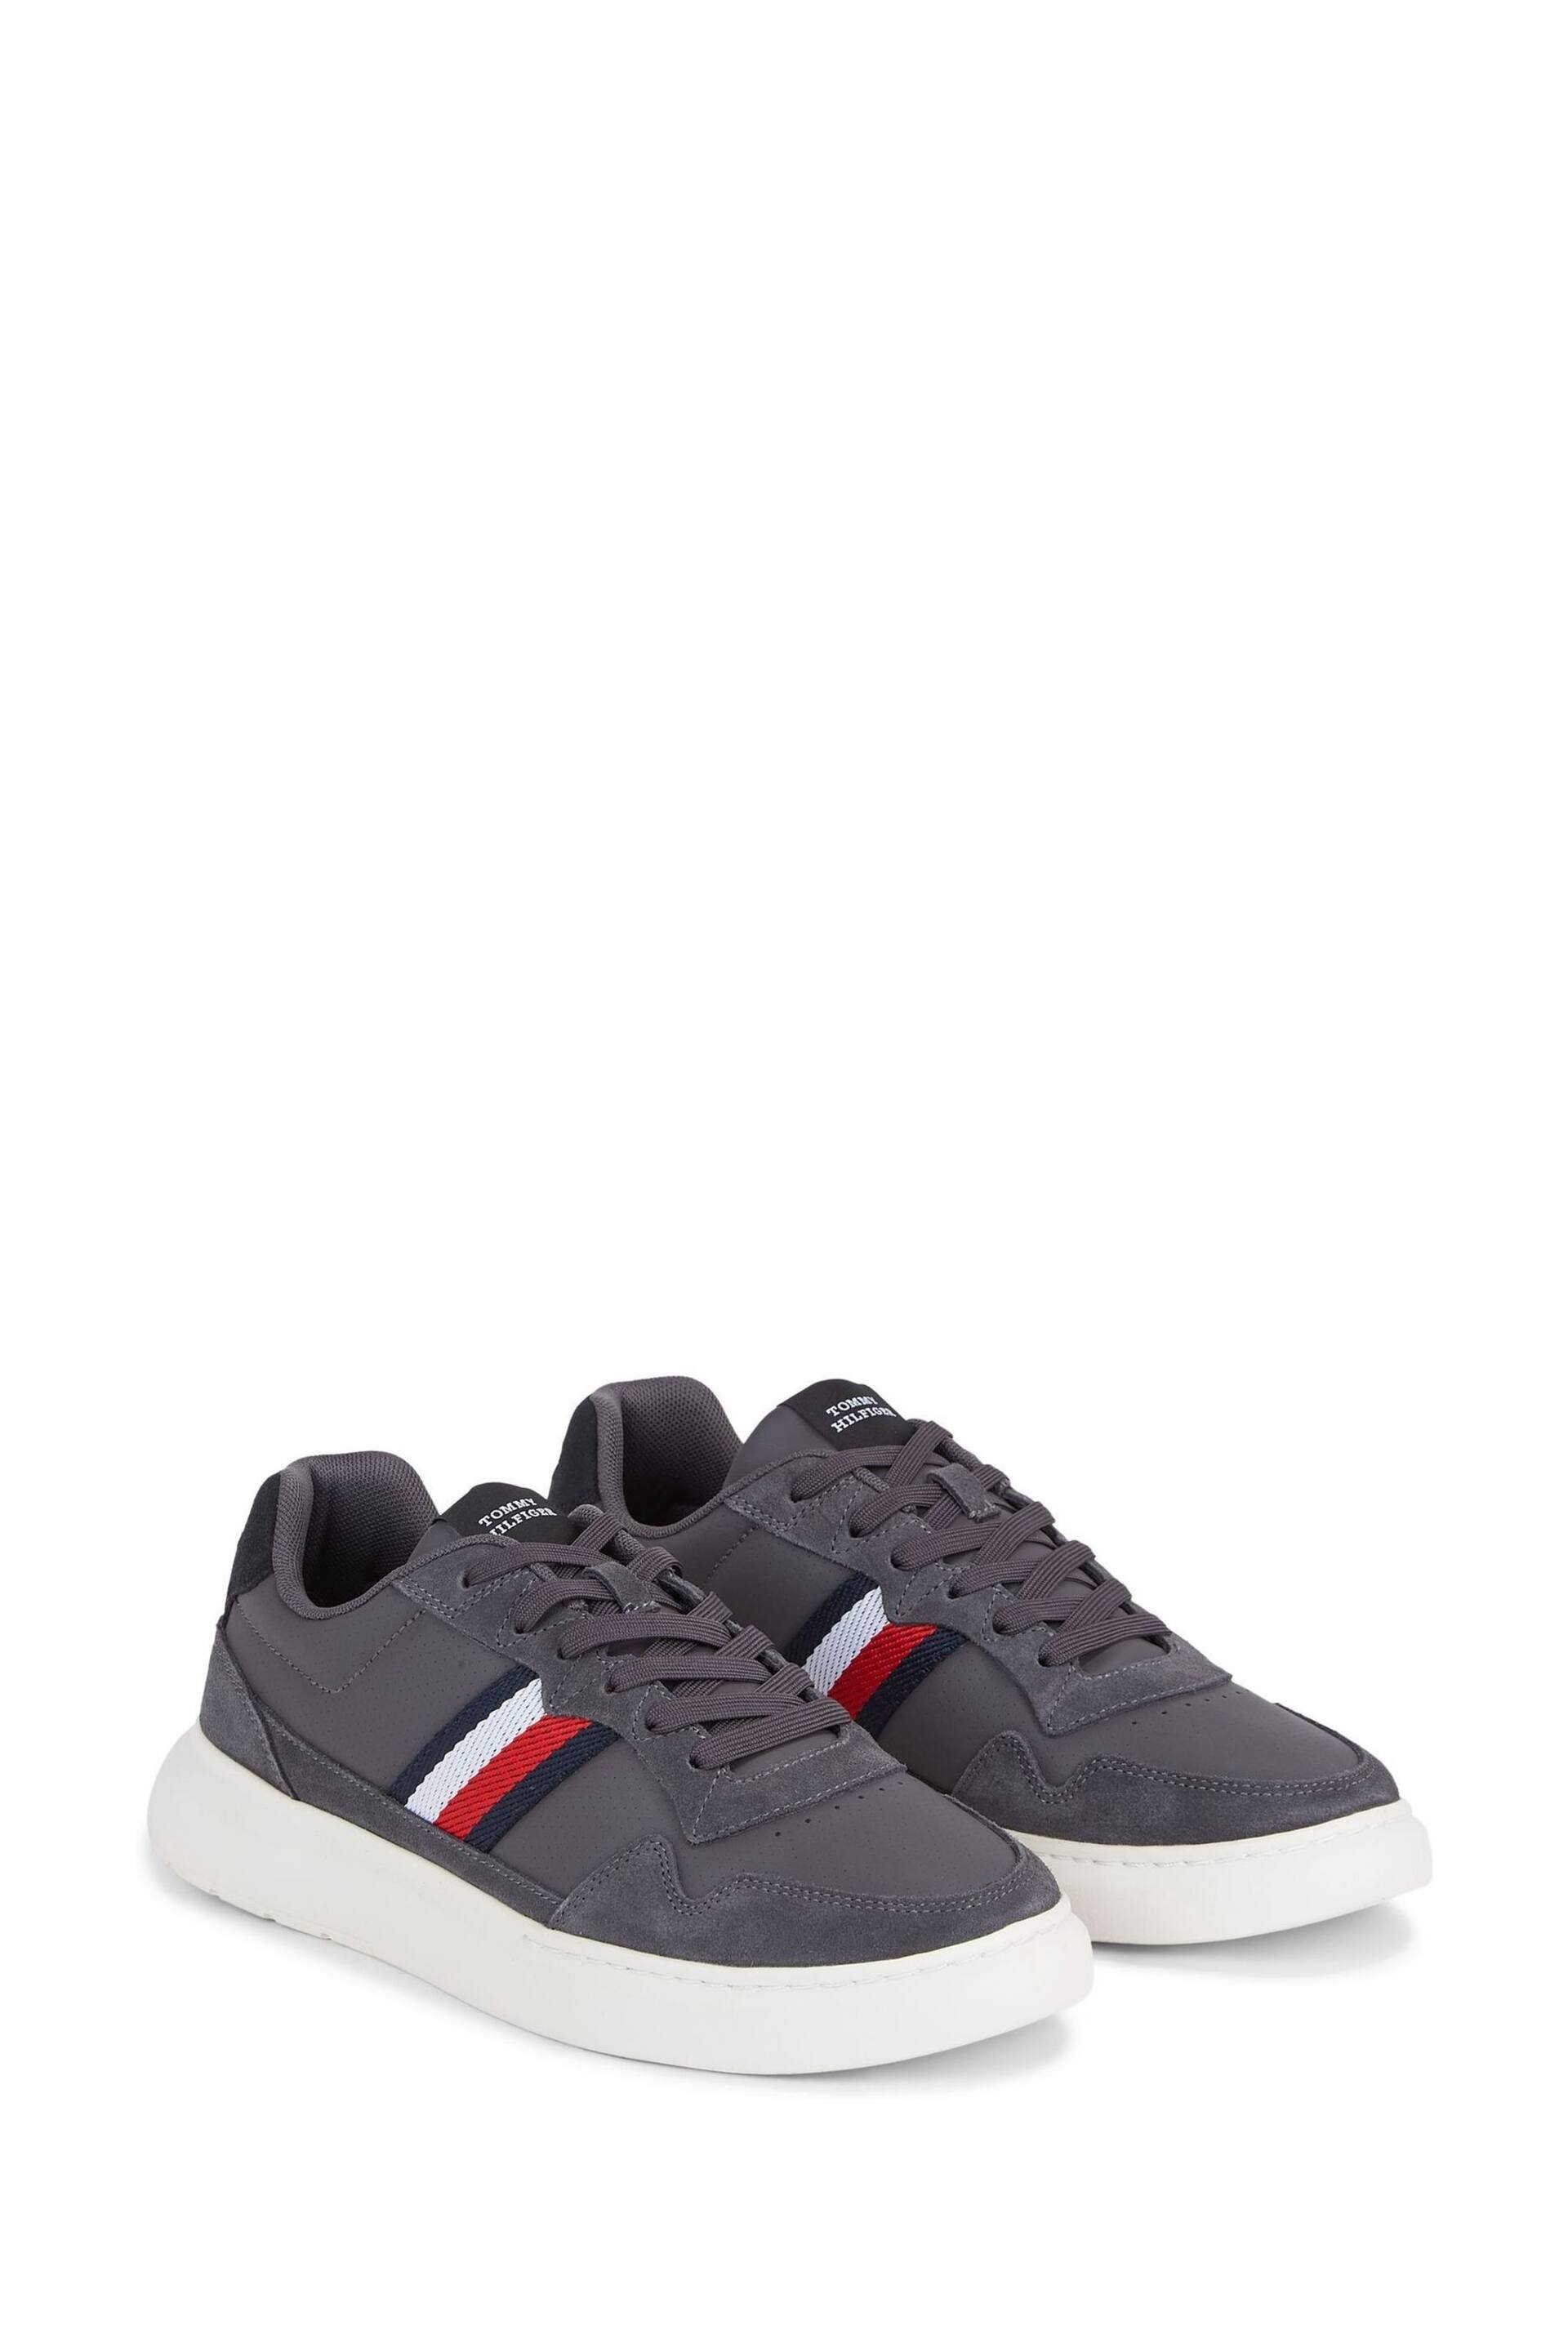 Tommy Hilfiger Silver Mix Stripes Sneakers - Image 2 of 5